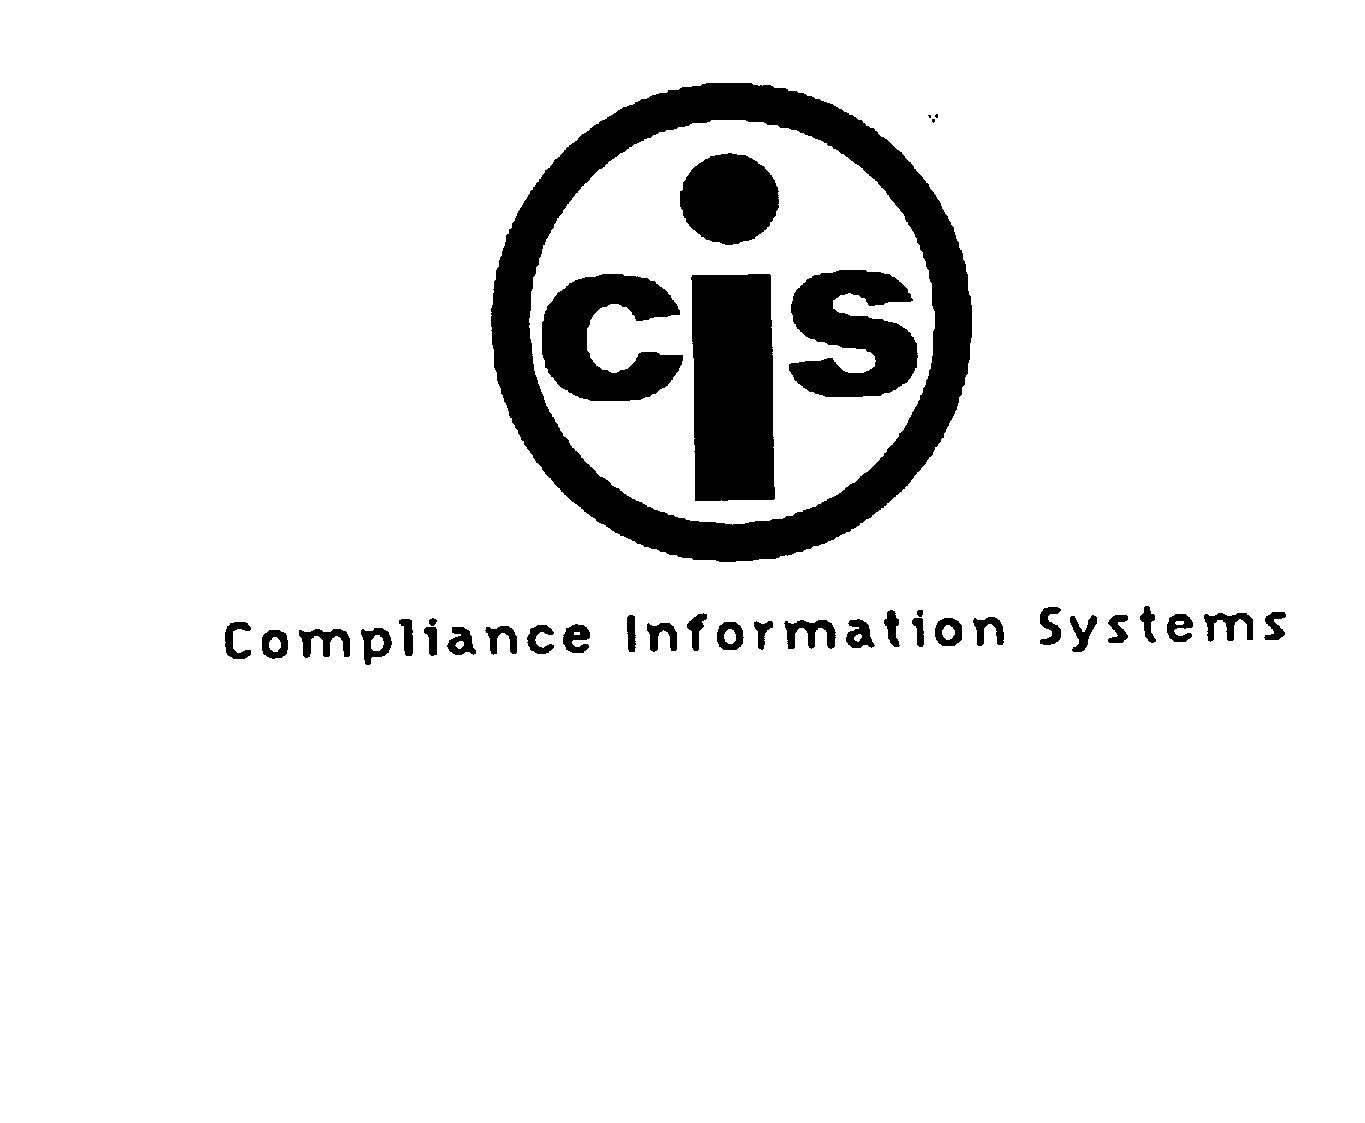 COMPLIANCE INFORMATION SYSTEMS